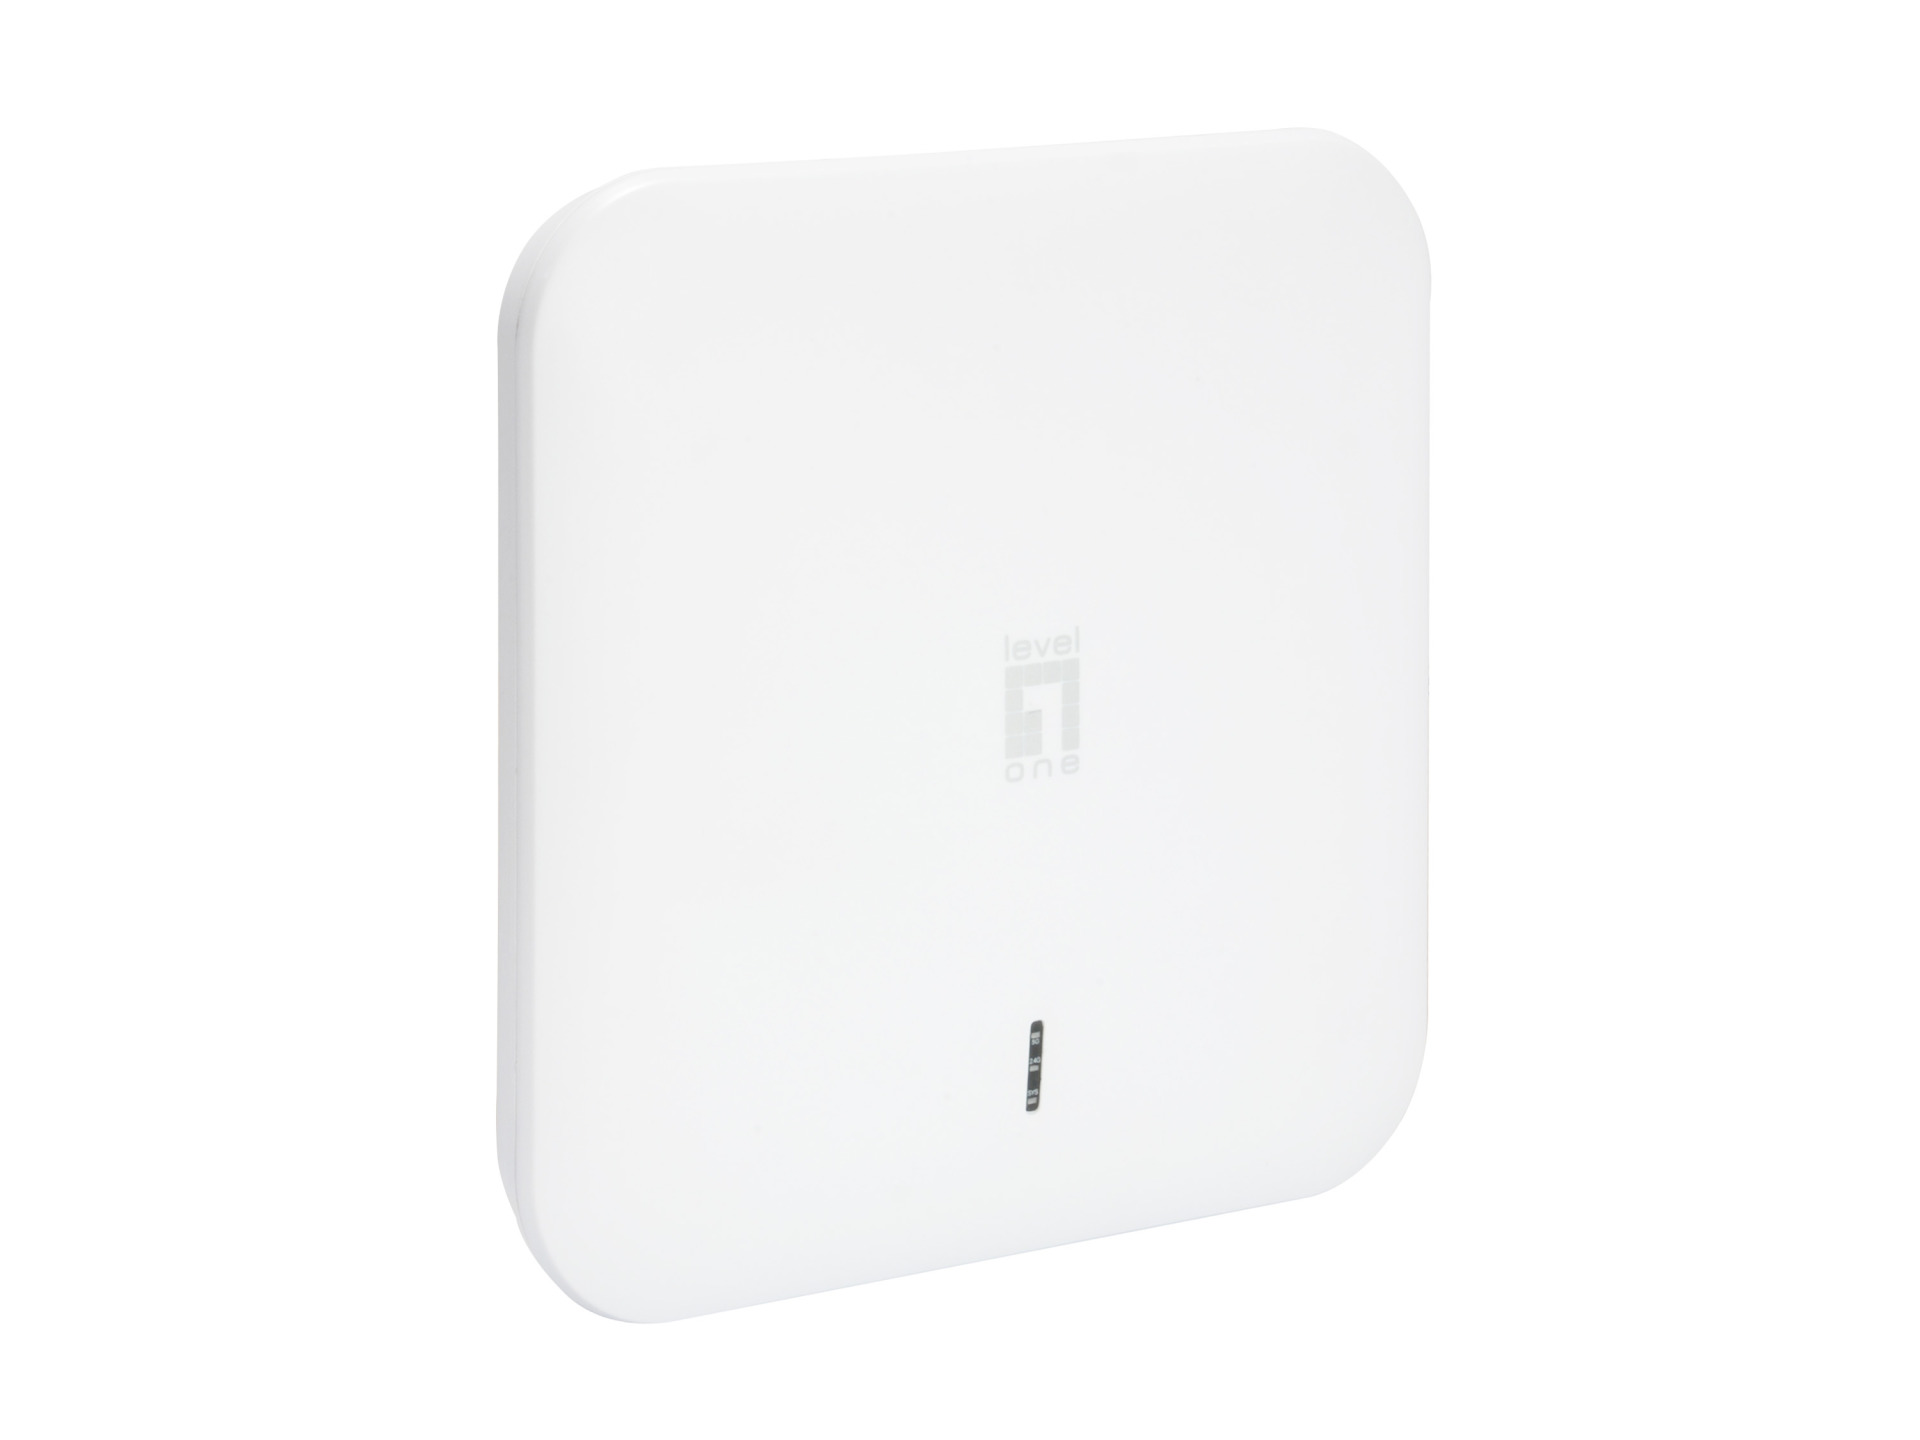 Managed PoE WLAN-Ceiling/Wall-Access-Point, 1200Mbit/s, Dual-Band, MU-MIMO